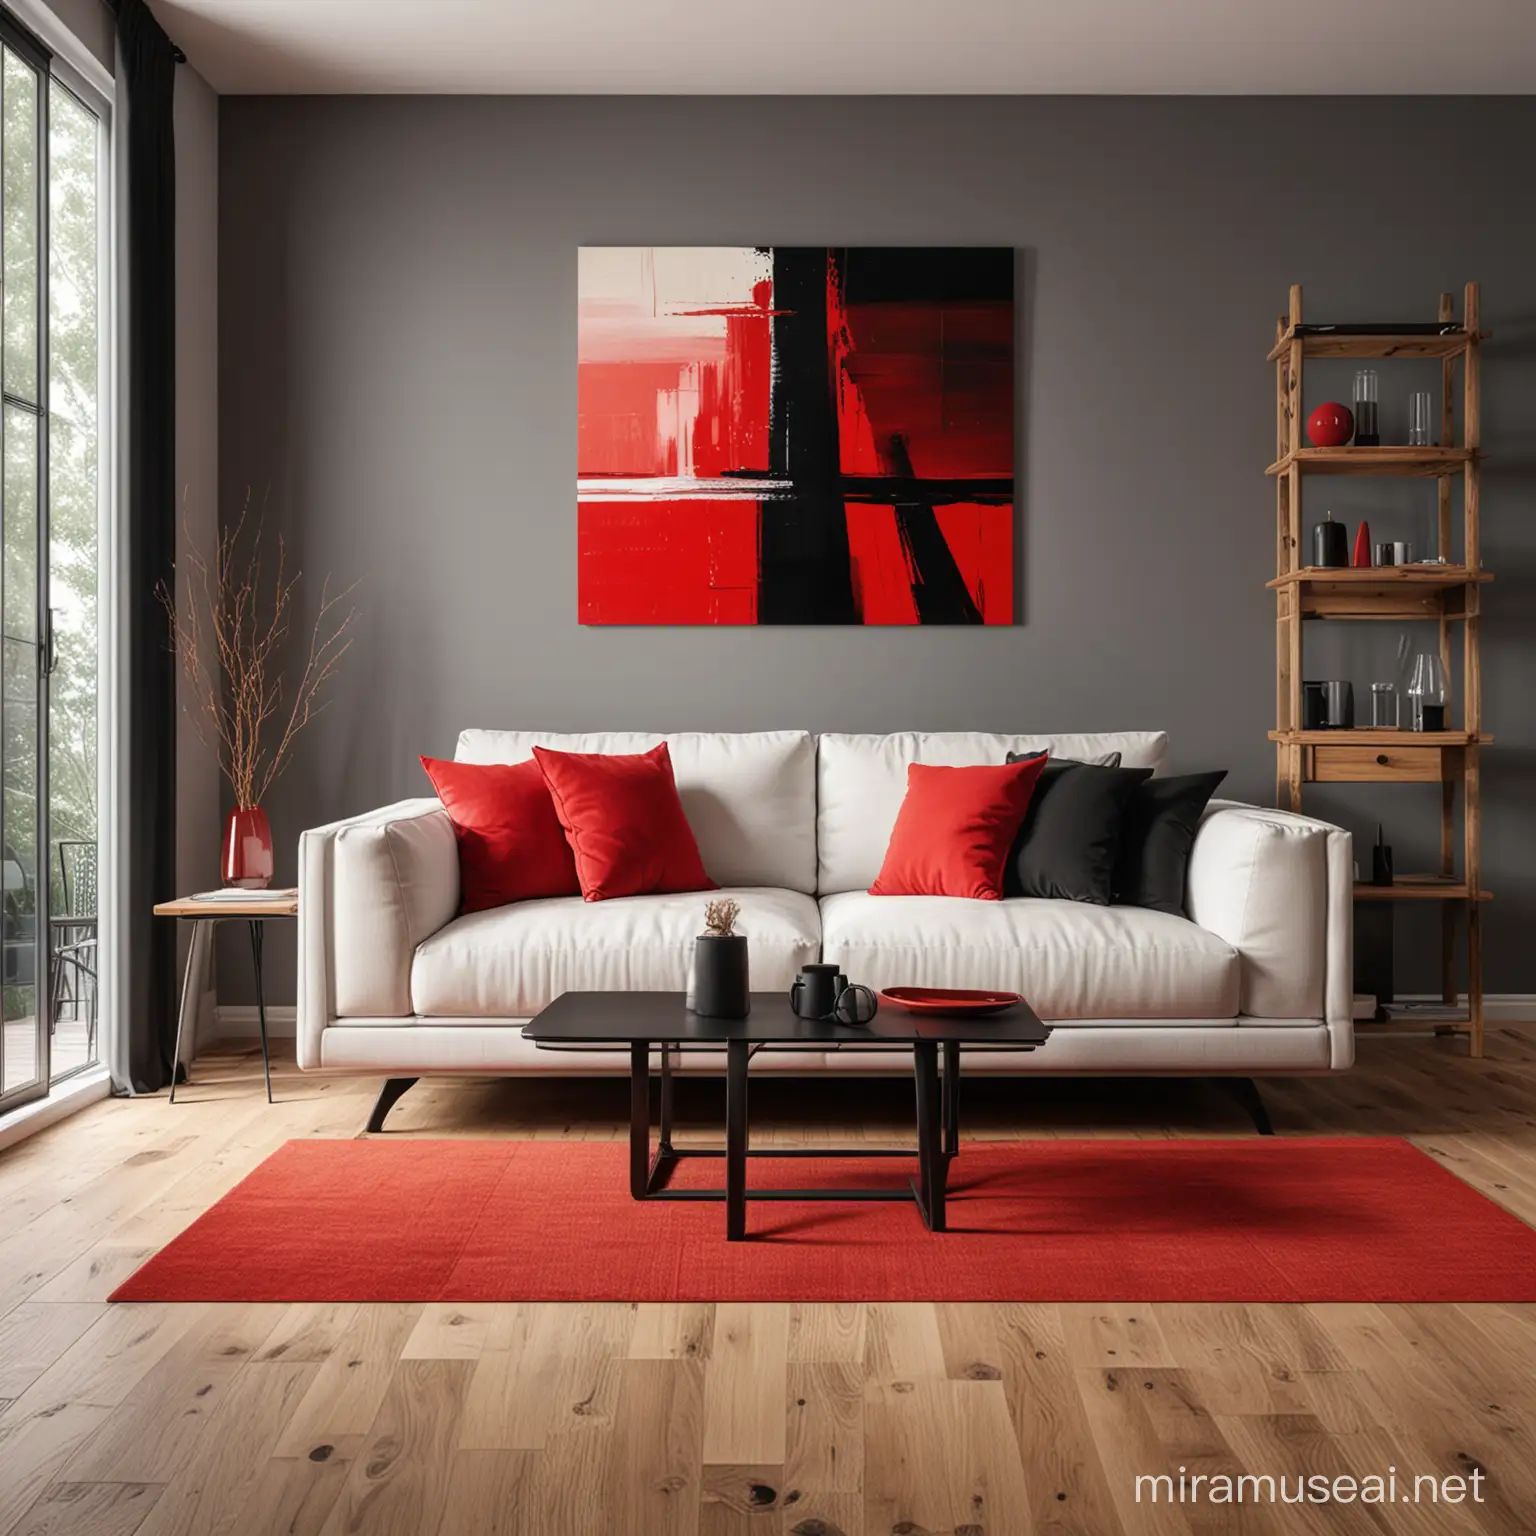 Contemporary Living Room Interior with Abstract Artwork and Wooden Accents